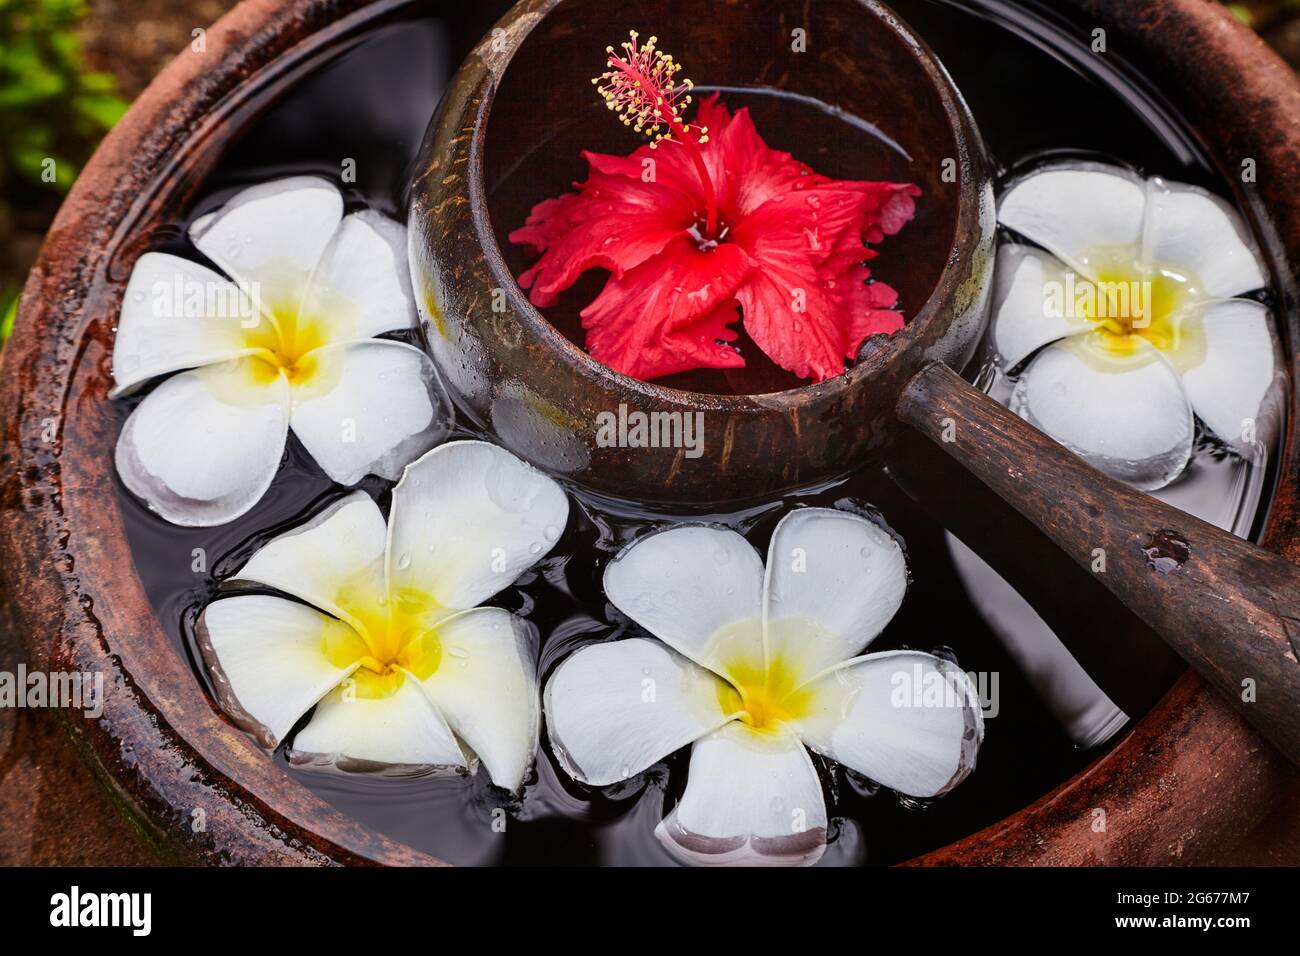 Water-filled ceramic pot with a wooden scoop and flowers Stock Photo